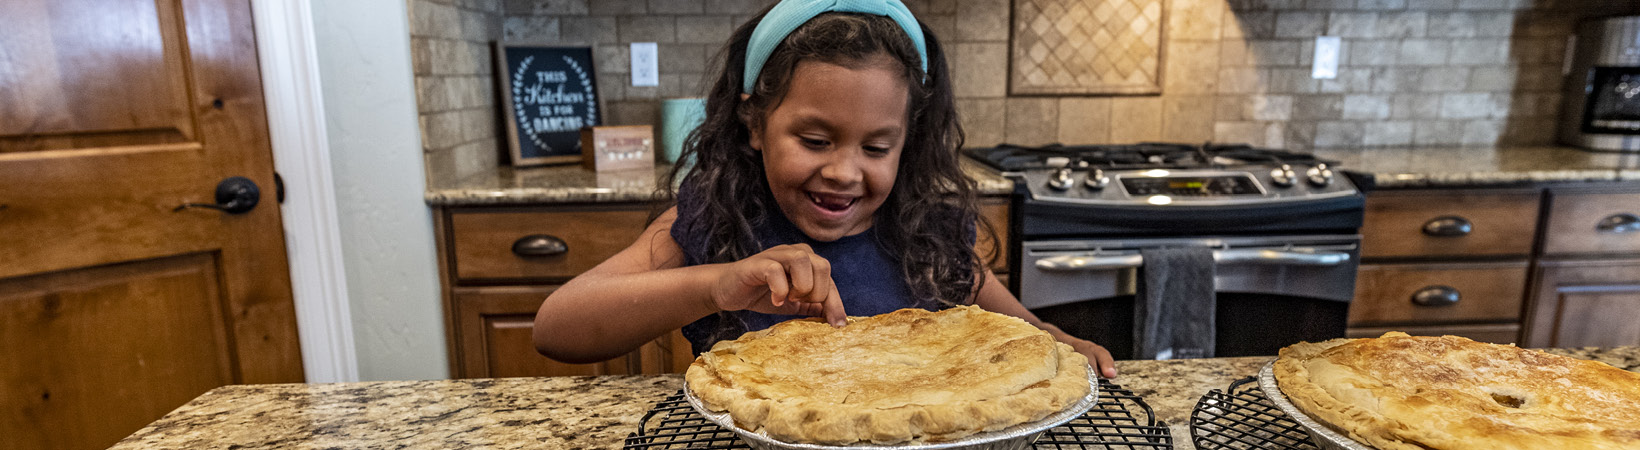 Little girl in the kitchen poking at a pie